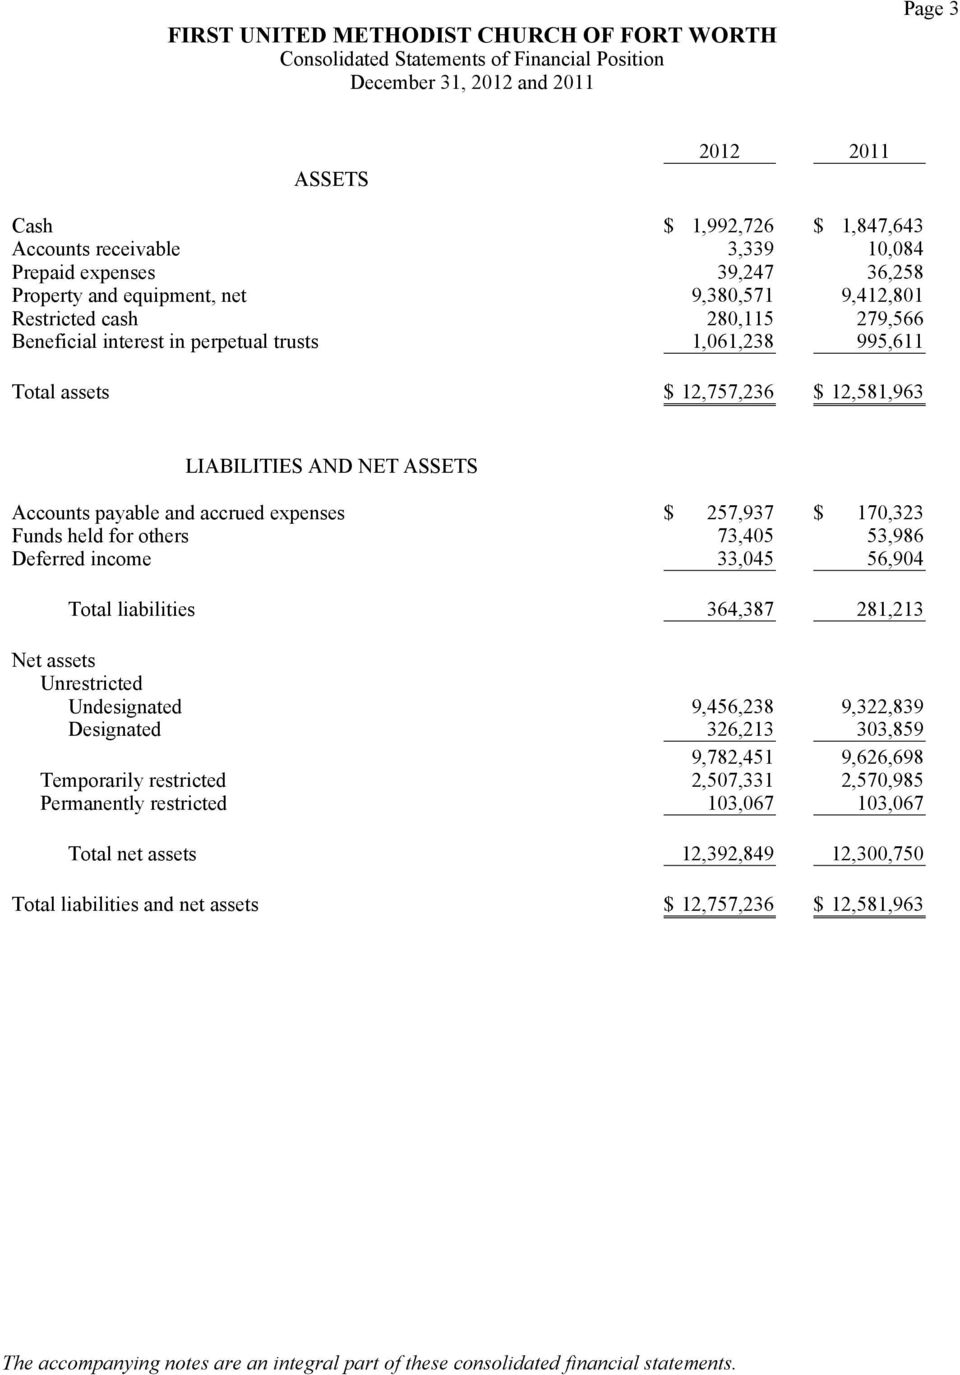 Accounts payable and accrued expenses $ 257,937 $ 170,323 Funds held for others 73,405 53,986 Deferred income 33,045 56,904 Total liabilities 364,387 281,213 Net assets Unrestricted Undesignated